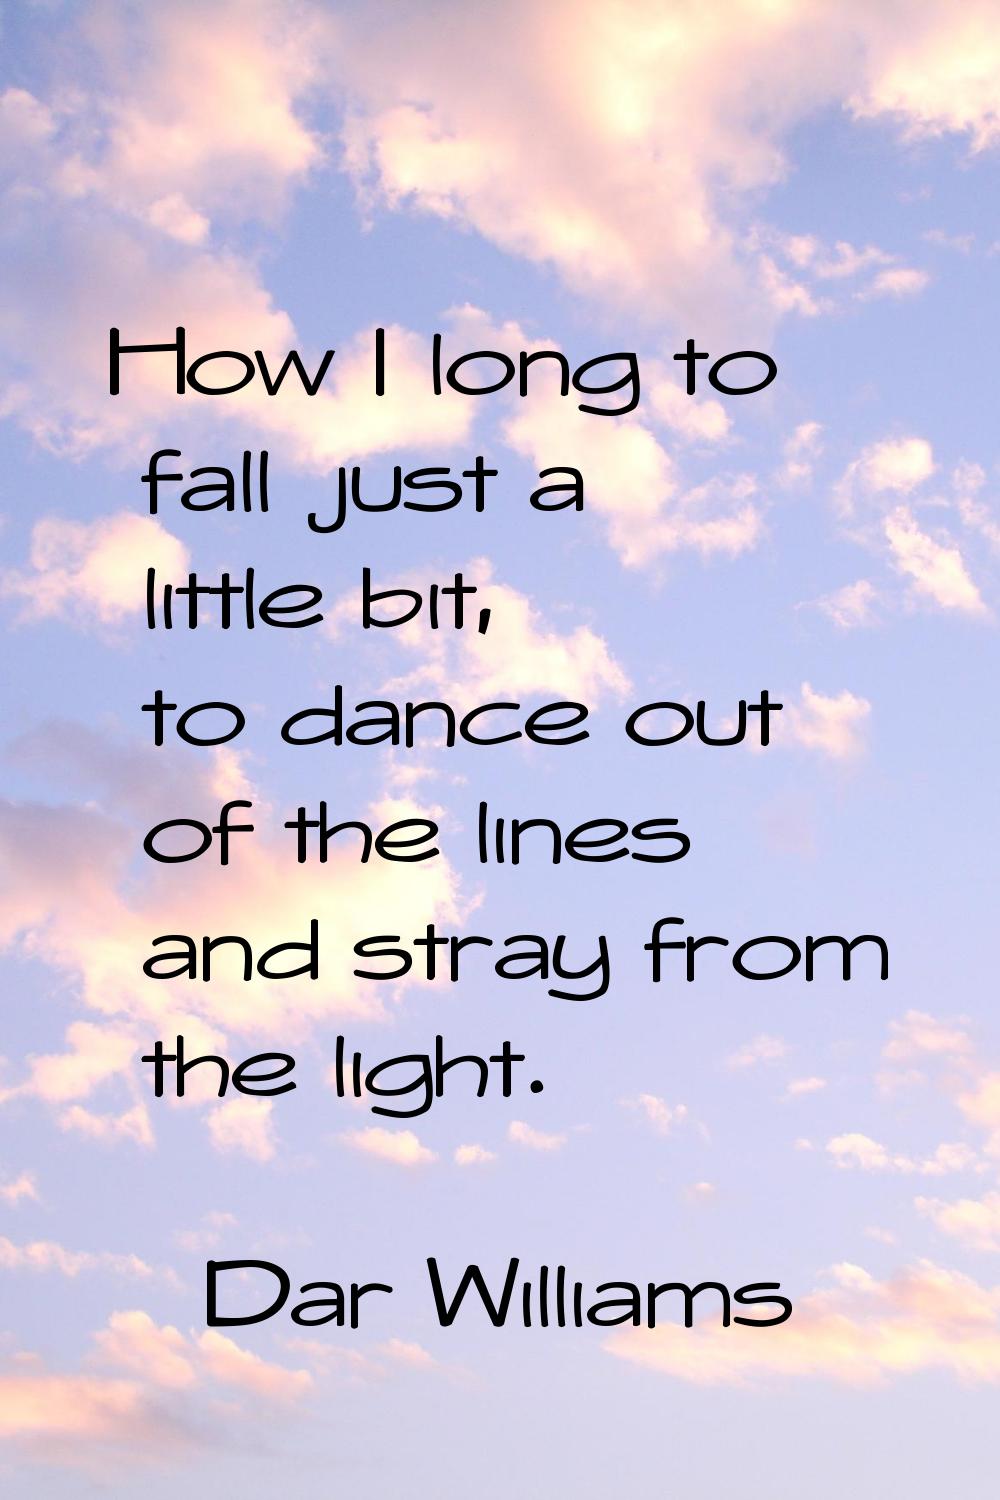 How I long to fall just a little bit, to dance out of the lines and stray from the light.